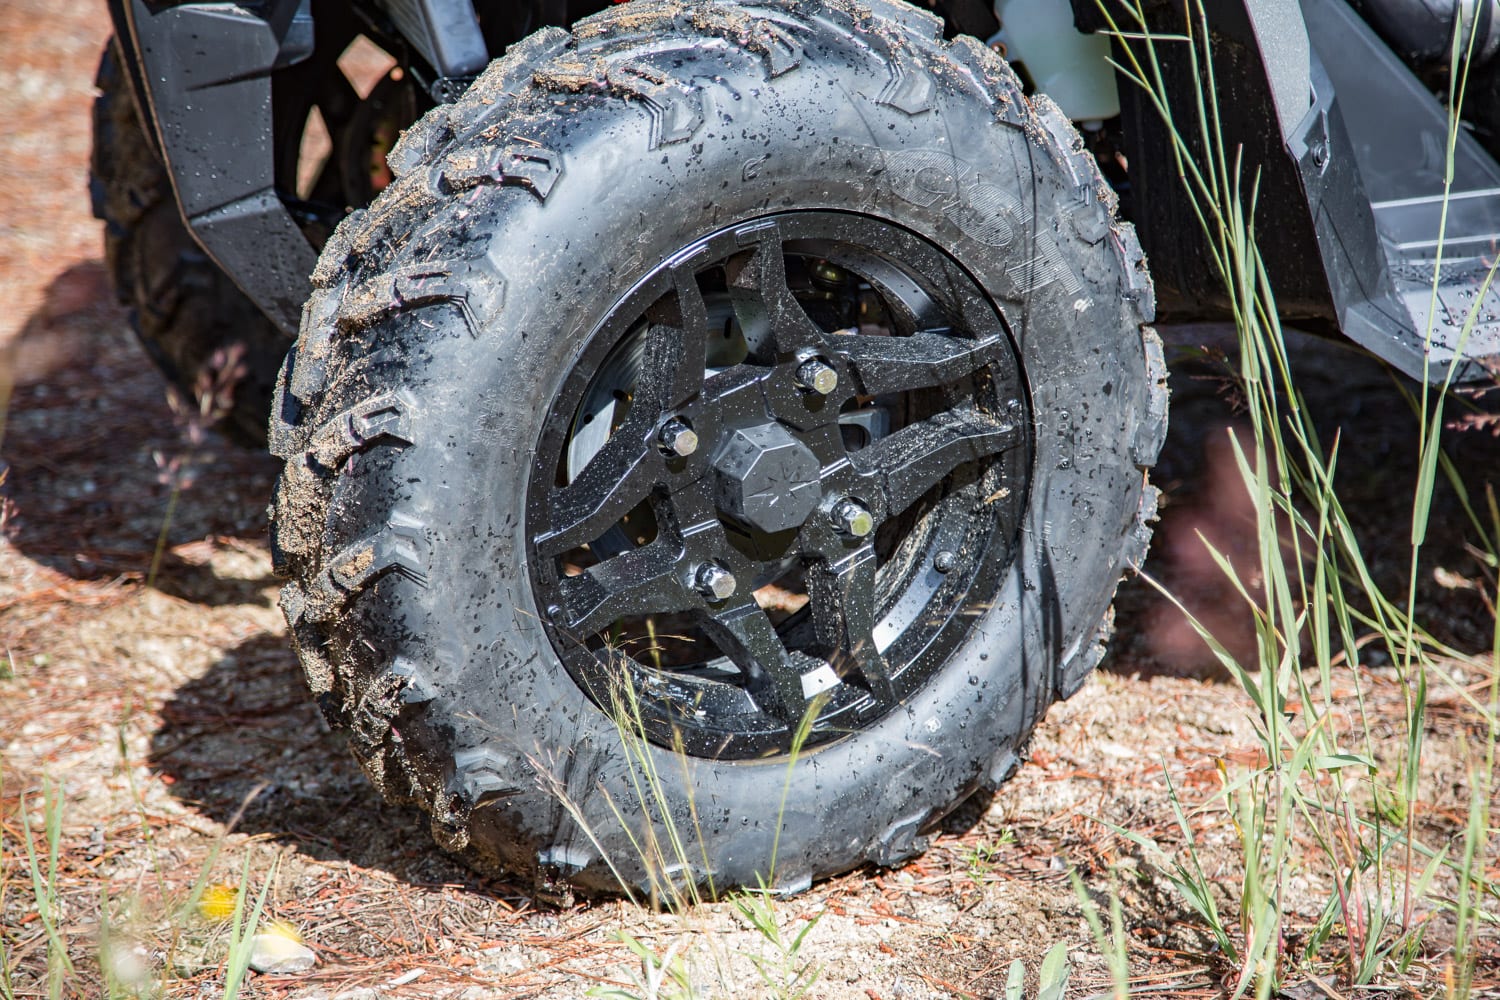 Important things to check when buying a used ATV